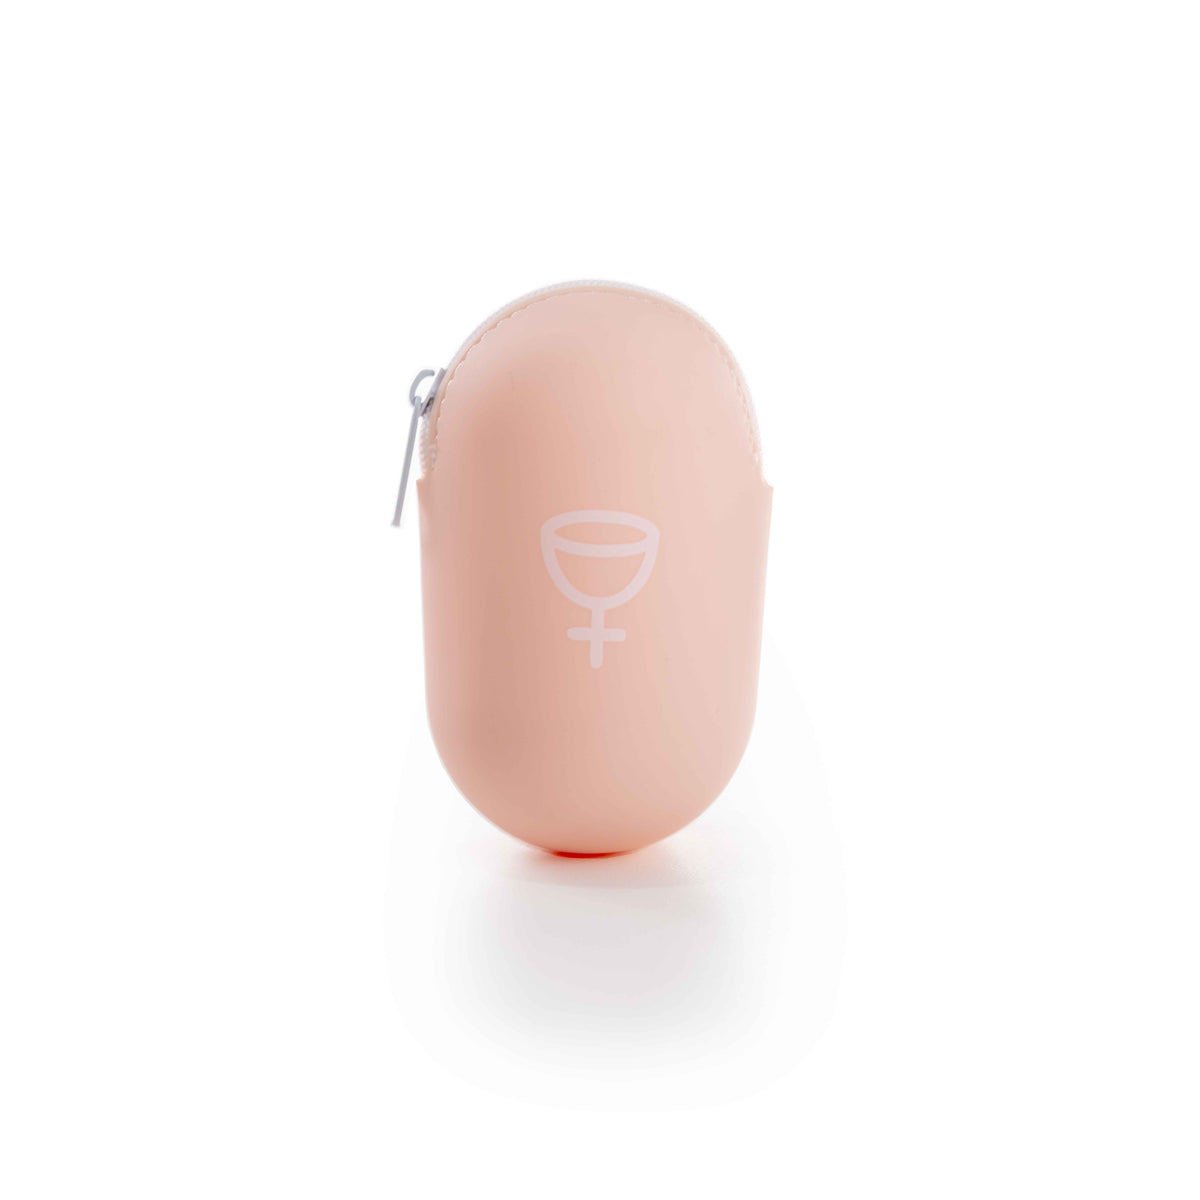 How menstrual cup works